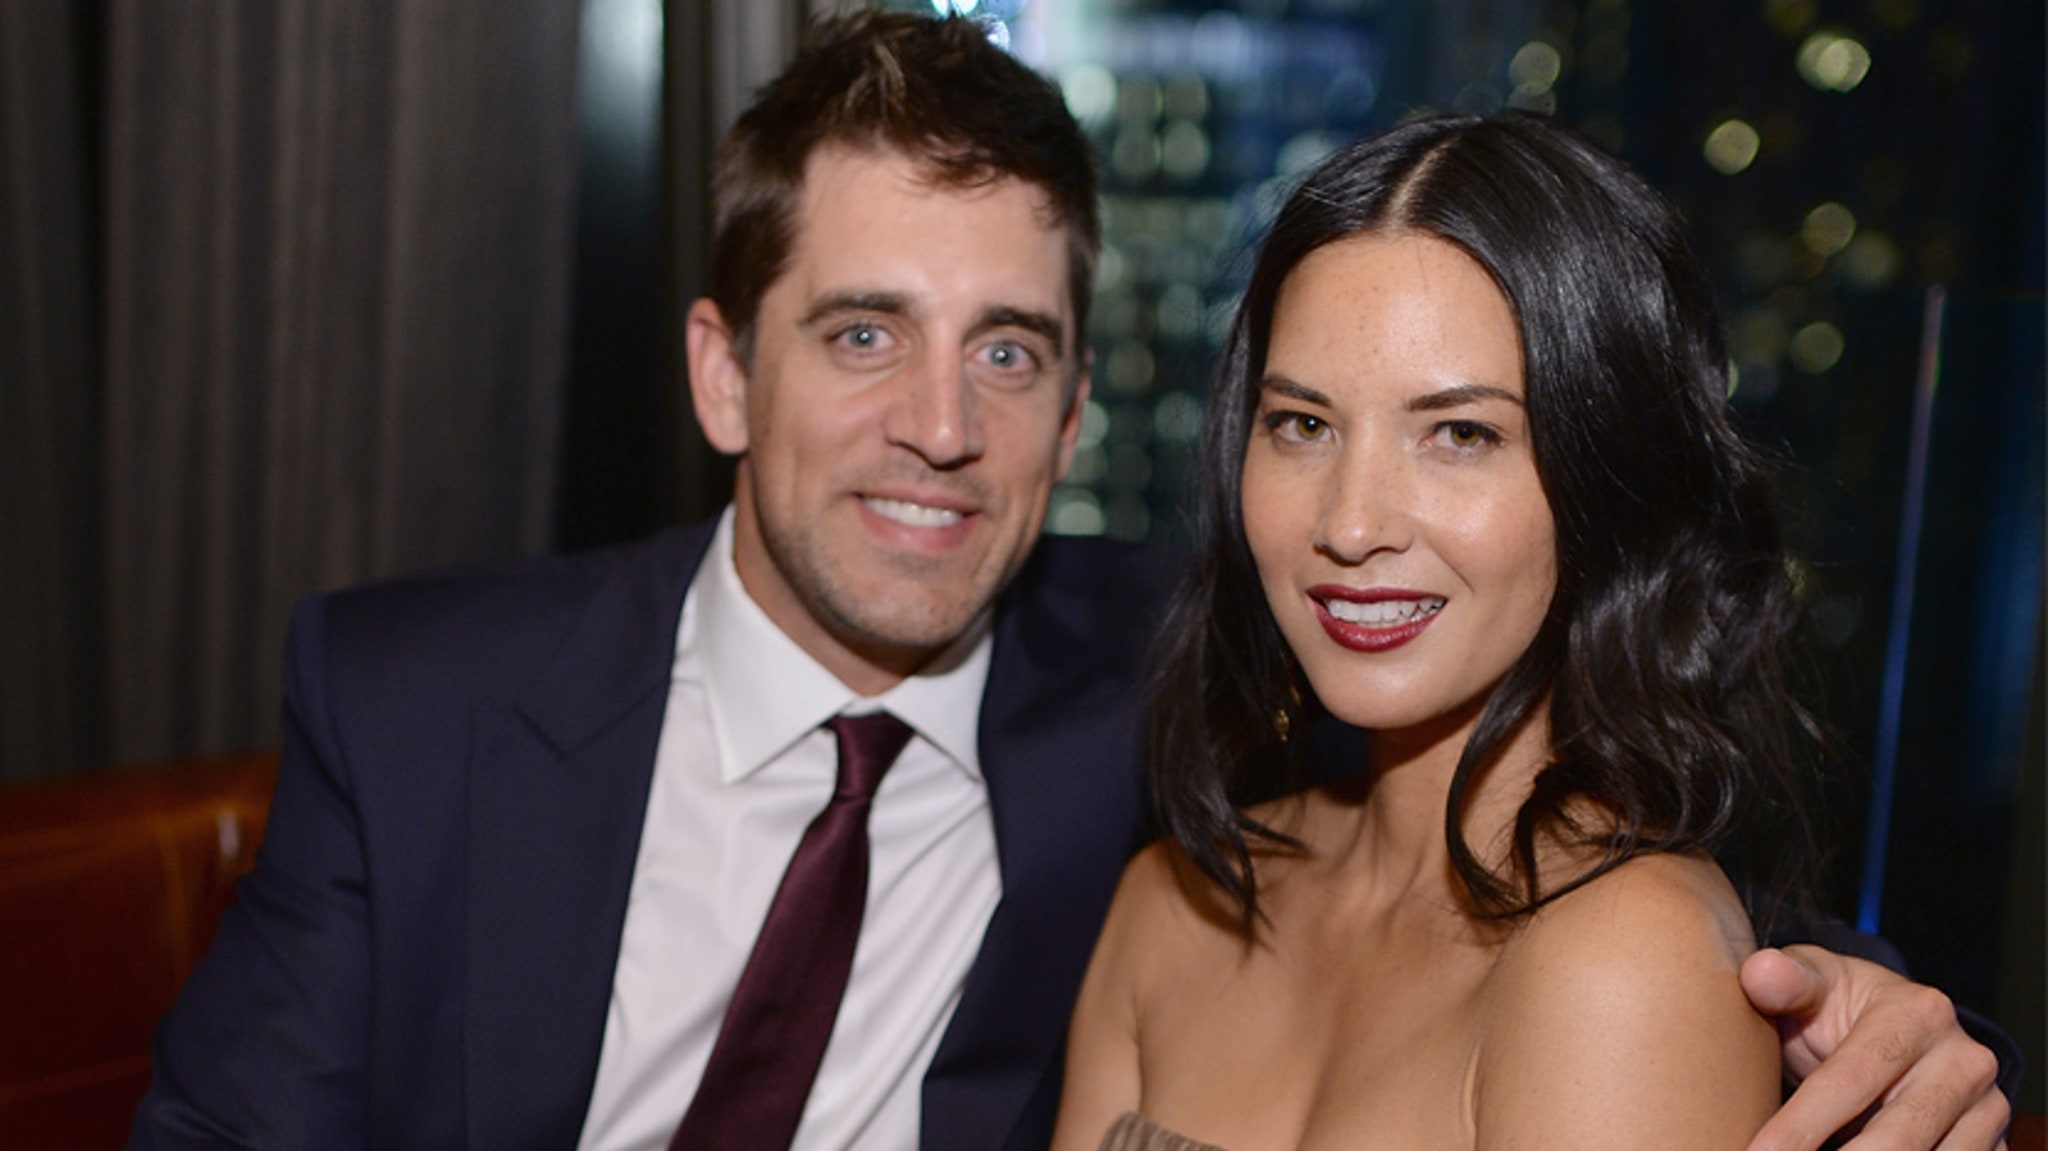 Olivia Munn Brings Aaron Rodgers As Her Date to New Movie Premiere.